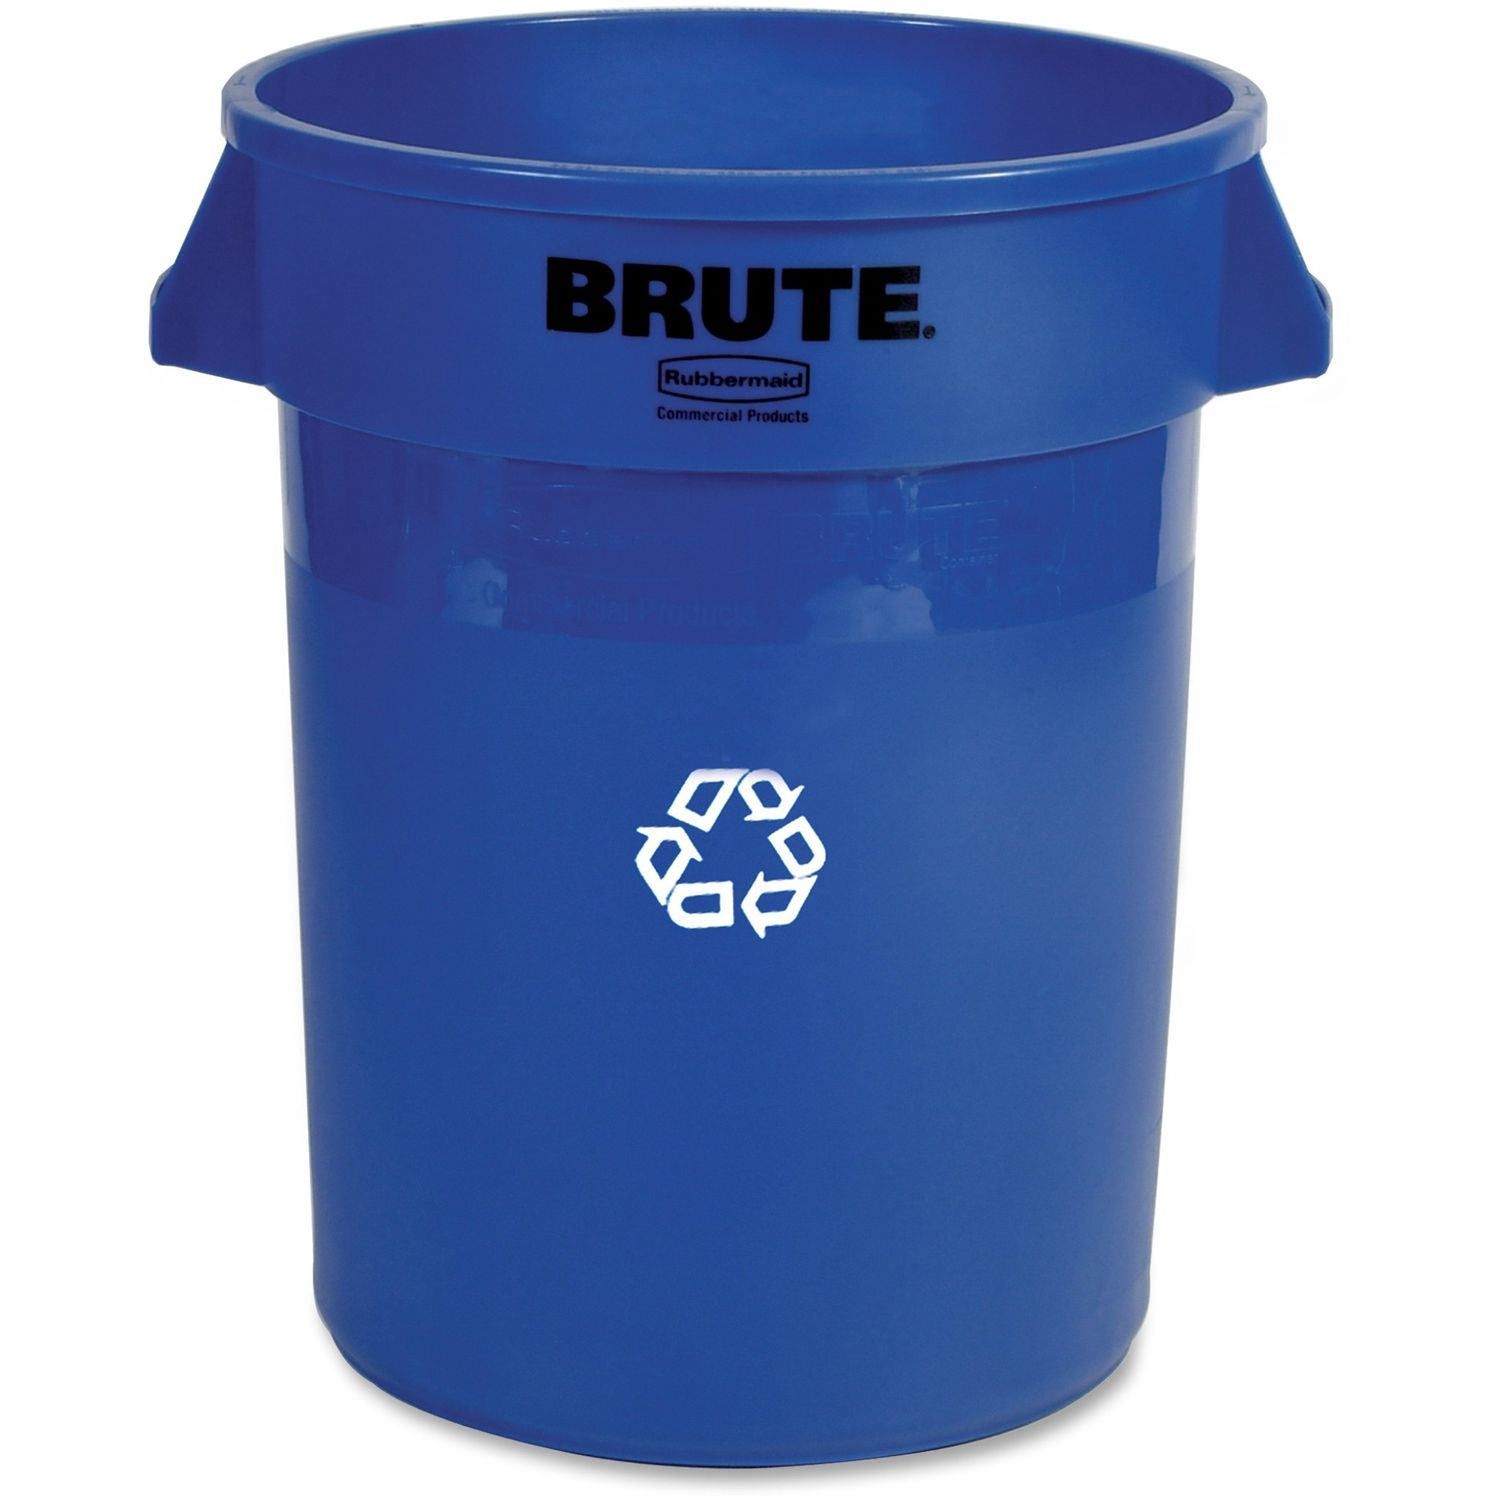 Brute Vented Recycling Container 32 gal Capacity, Round, Heavy Duty, Rust Resistant, Chip Resistant, Dent Resistant, Peel Resistant, Durable, Handle, 27.3" Height x 22" Width x 22" Depth